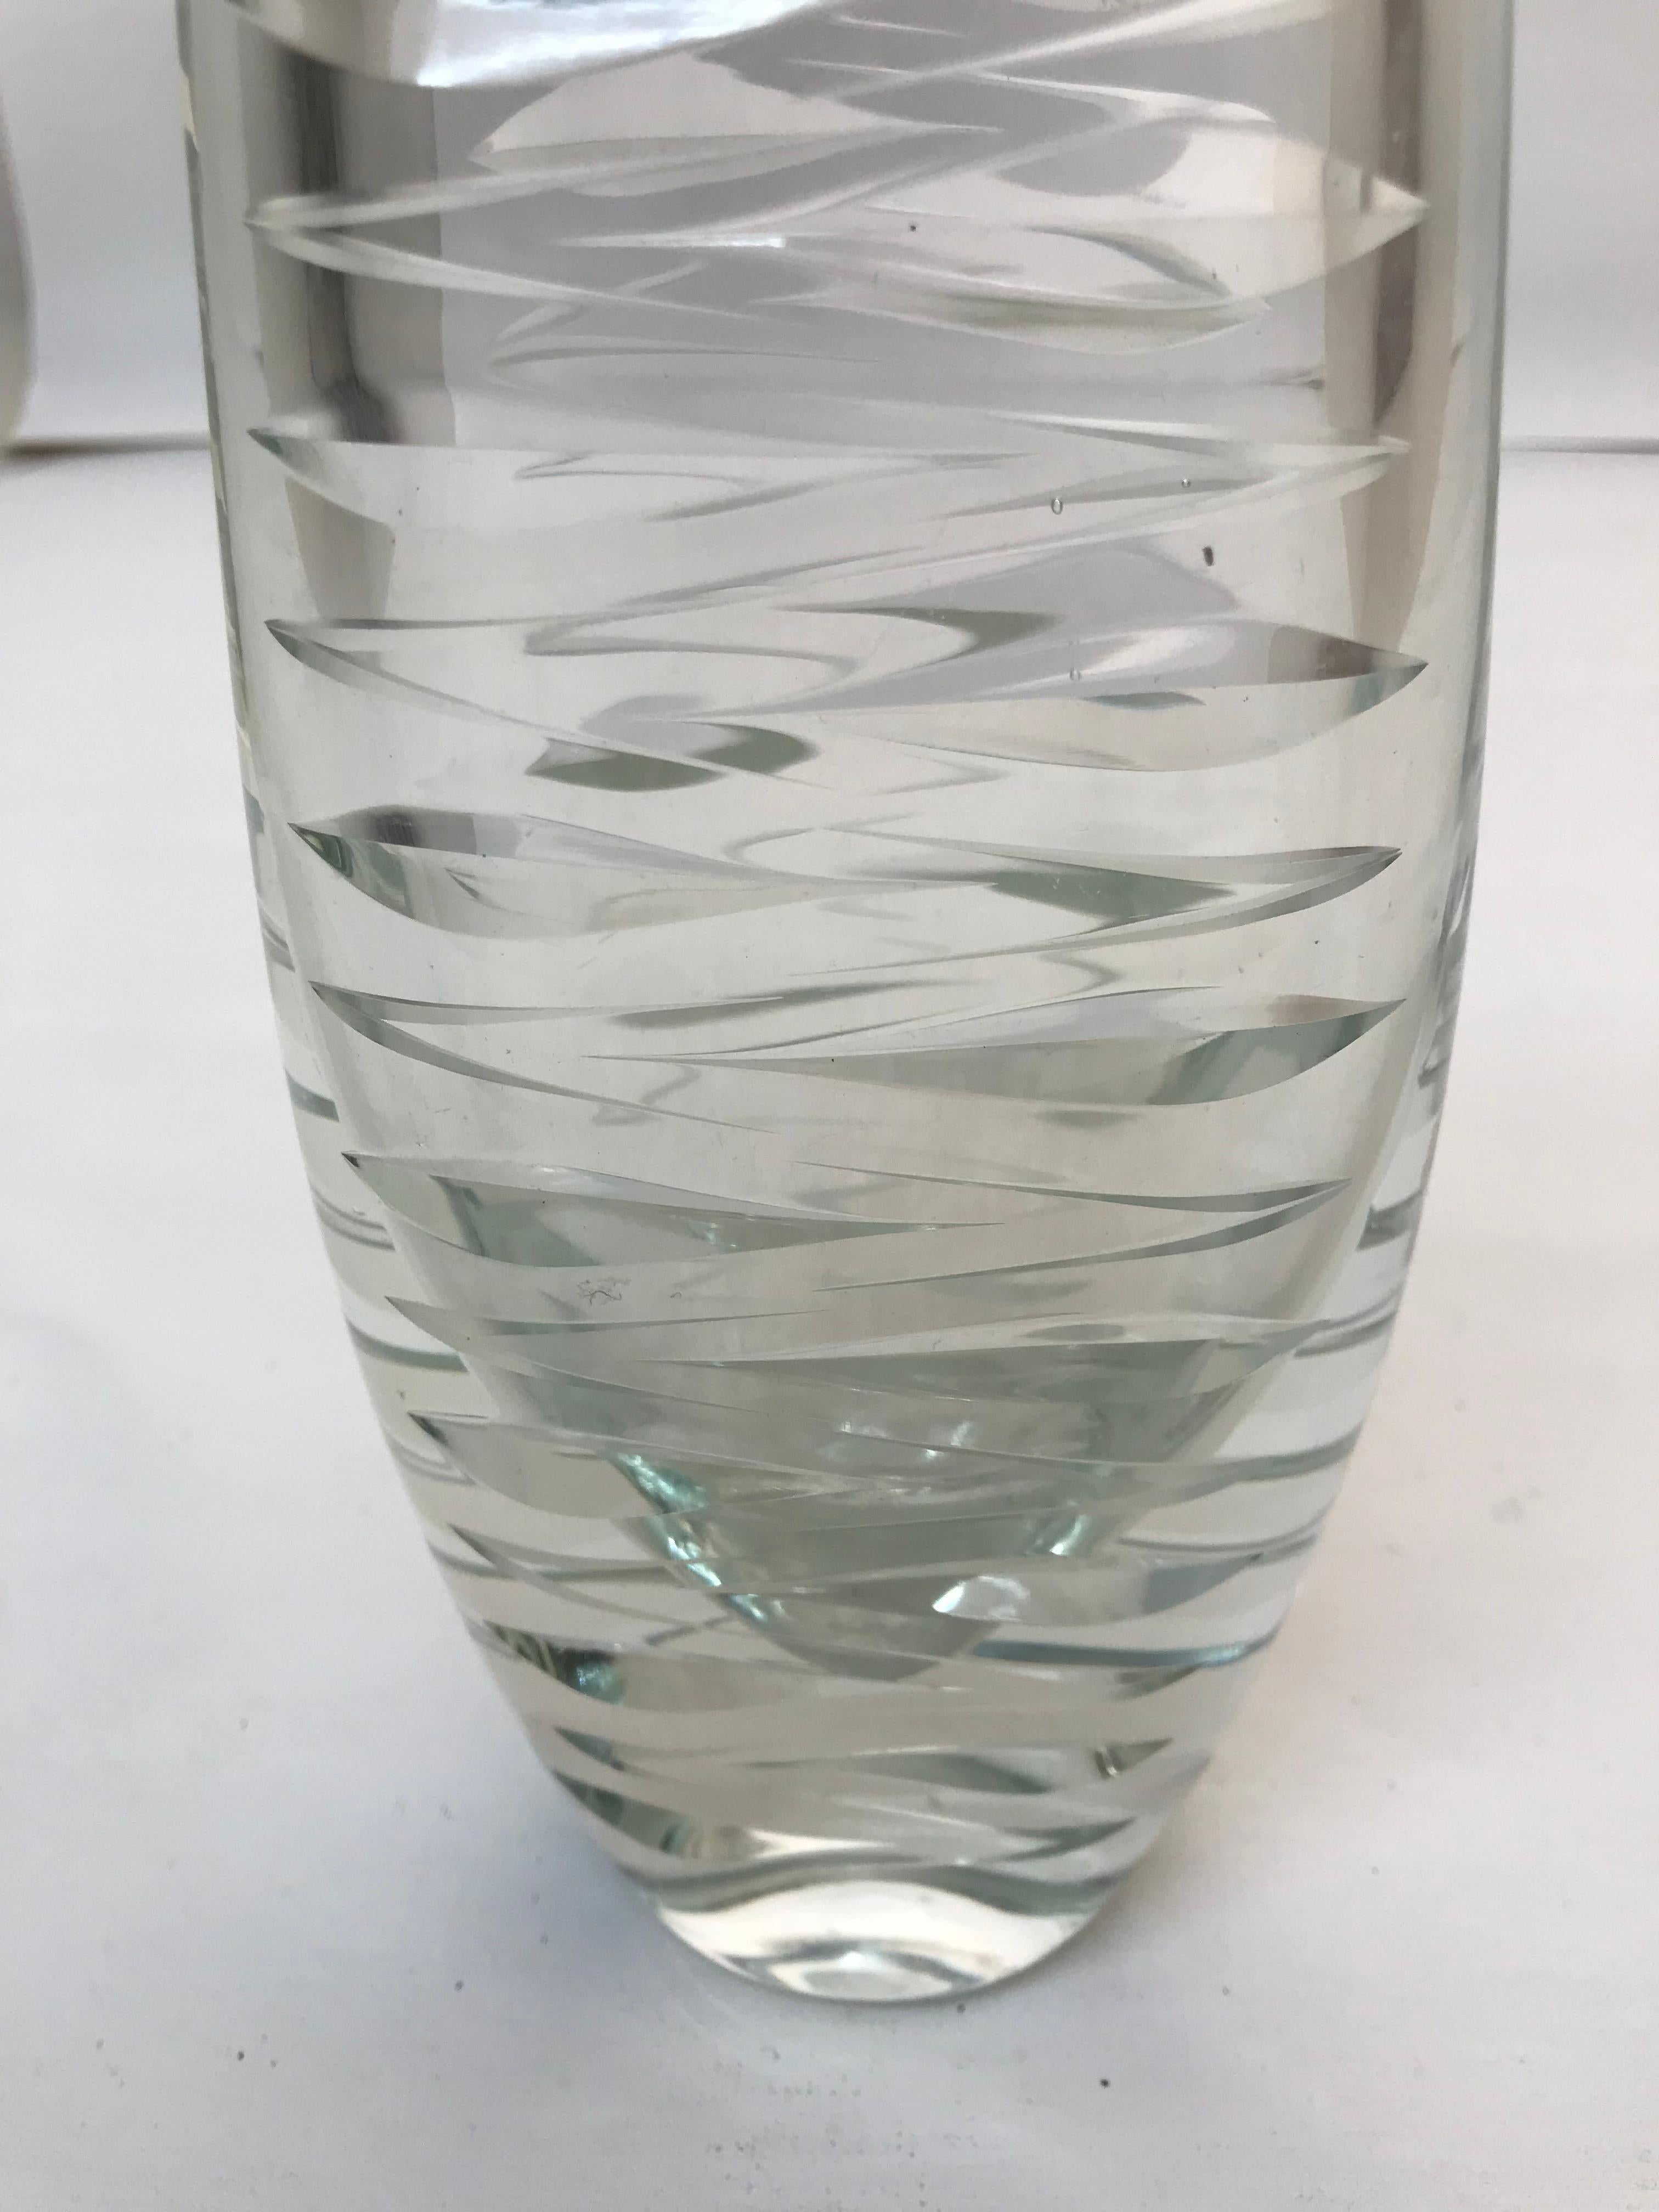 Vase of Crystal

We have specialized in the sale of Art Deco and Art Nouveau and Vintage styles since 1982. If you have any questions we are at your disposal.
Pushing the button that reads 'View All From Seller'. And you can see more objects to the